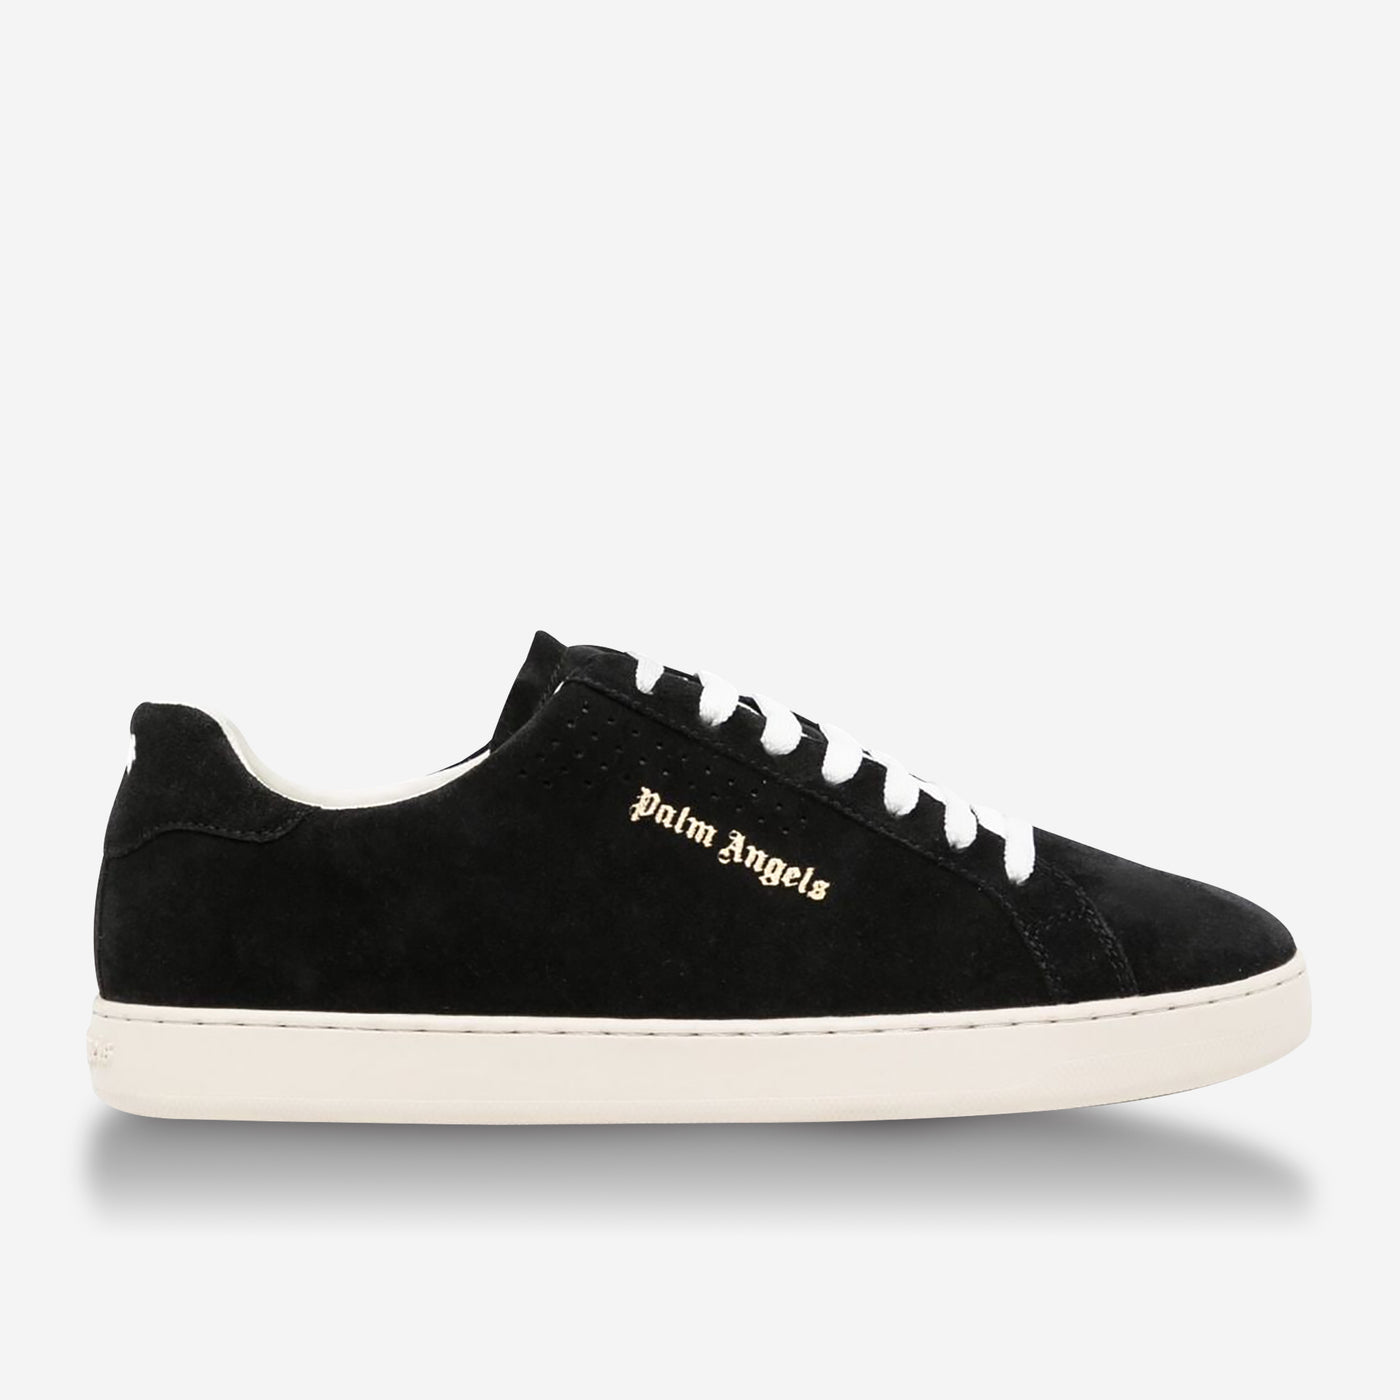 Palm Angels Suede Sneakers